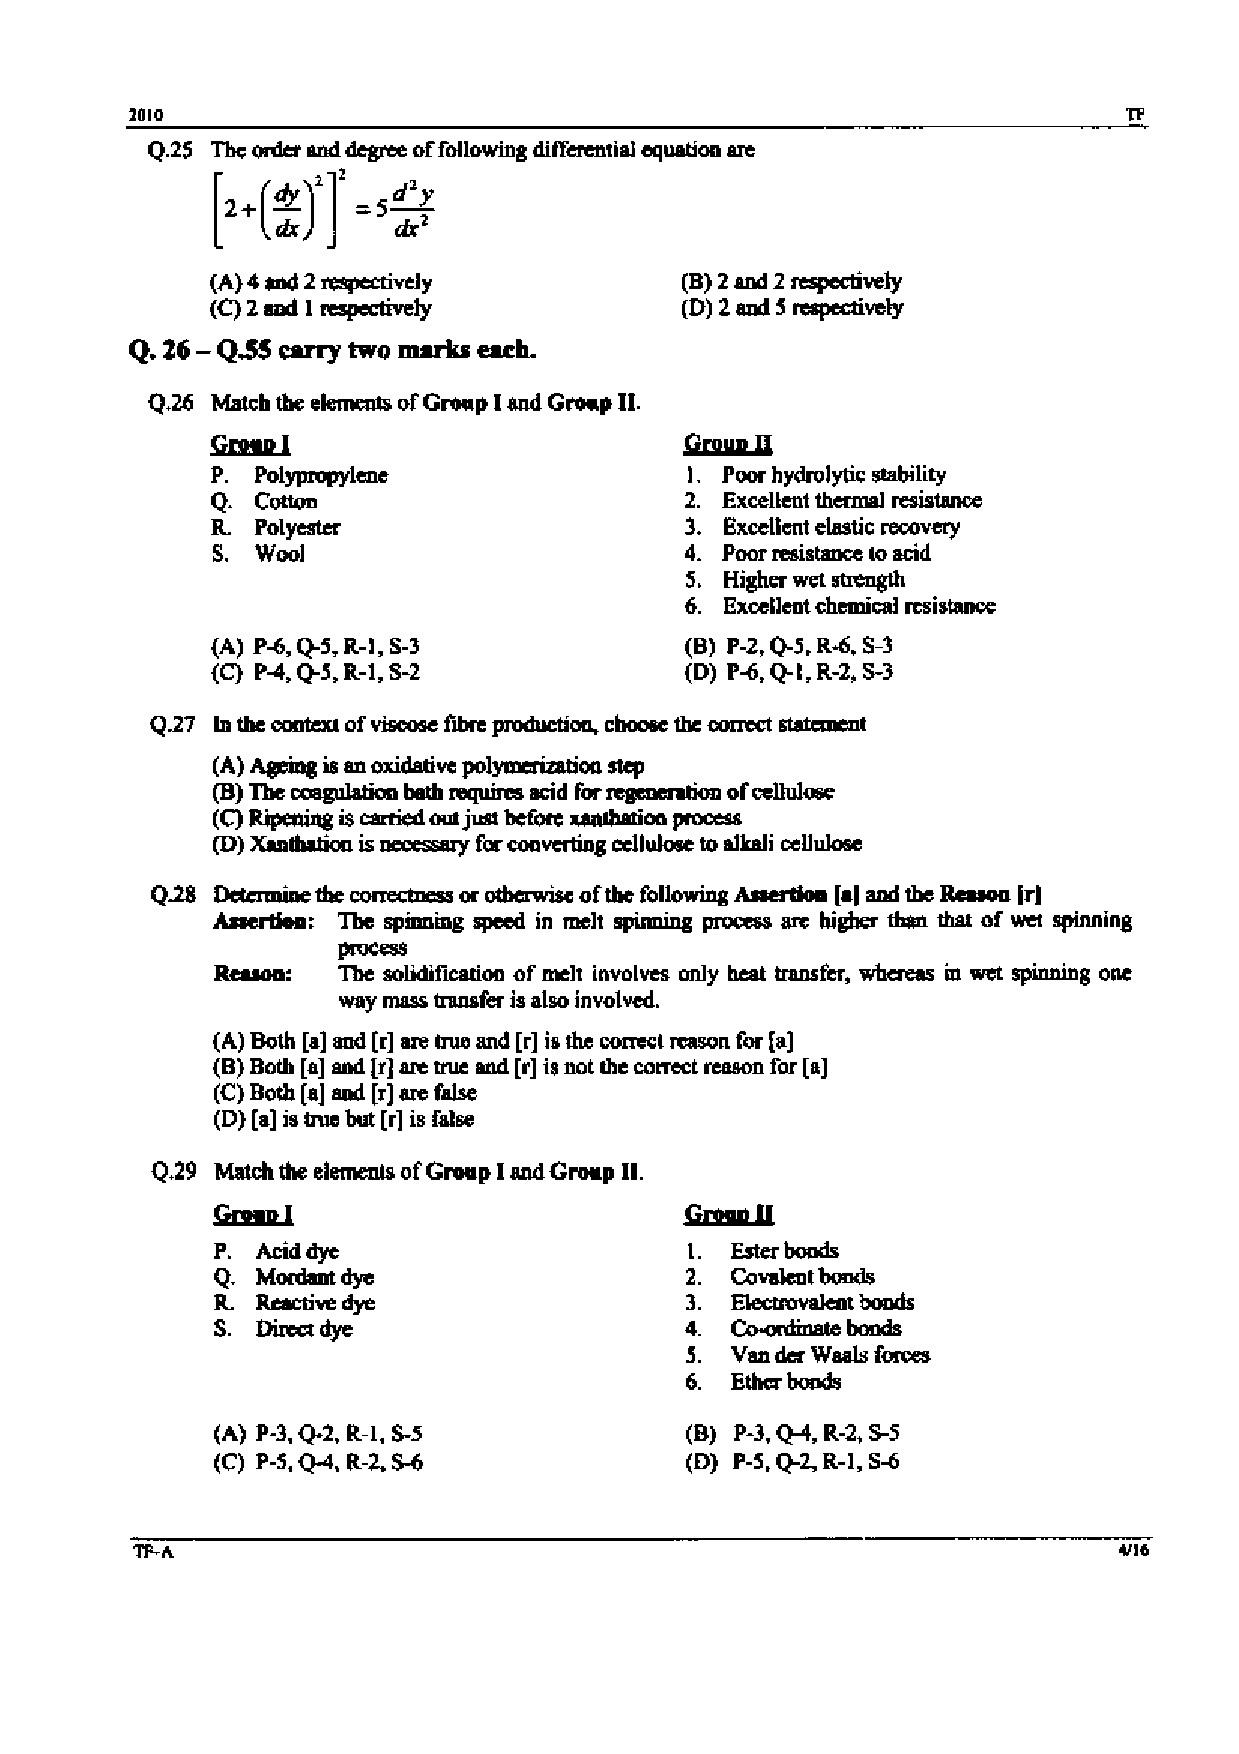 GATE Exam Question Paper 2010 Textile Engineering and Fibre Science 4